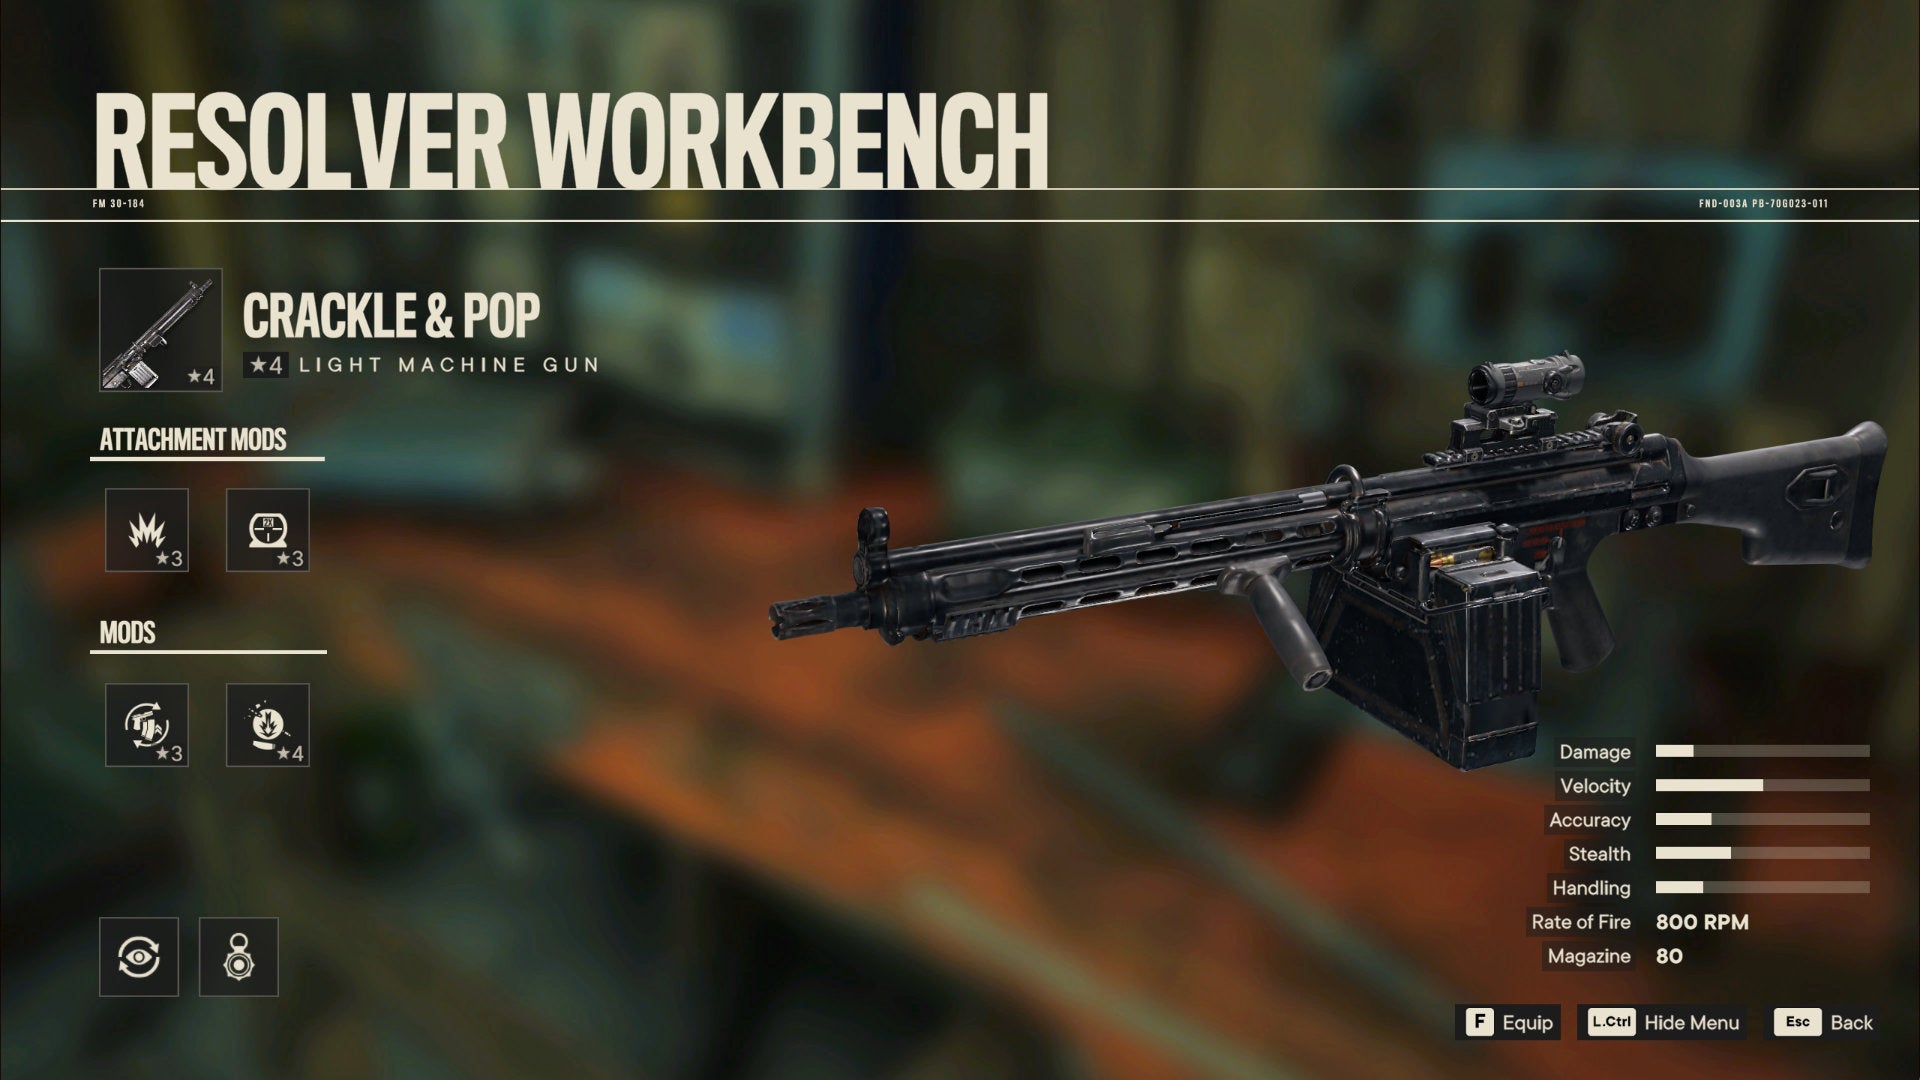 A screenshot of the Workbench screen in Far Cry 6 with Crackle & Pop selected.